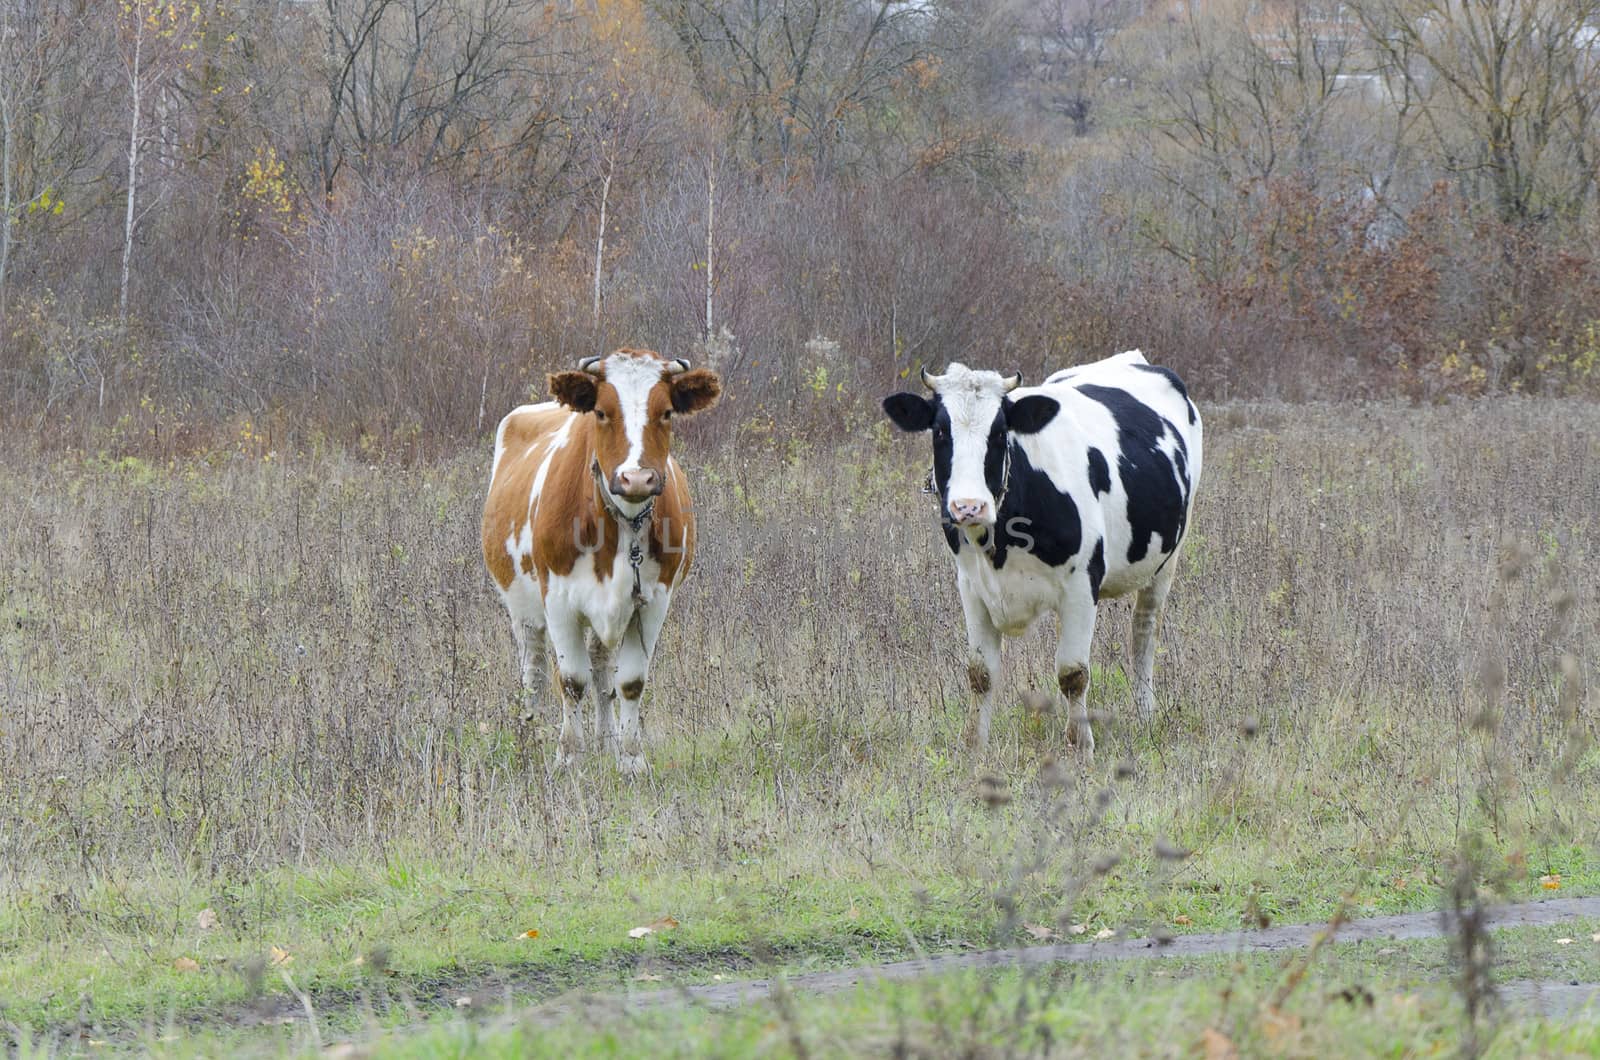 Two cows in a field look into the lens